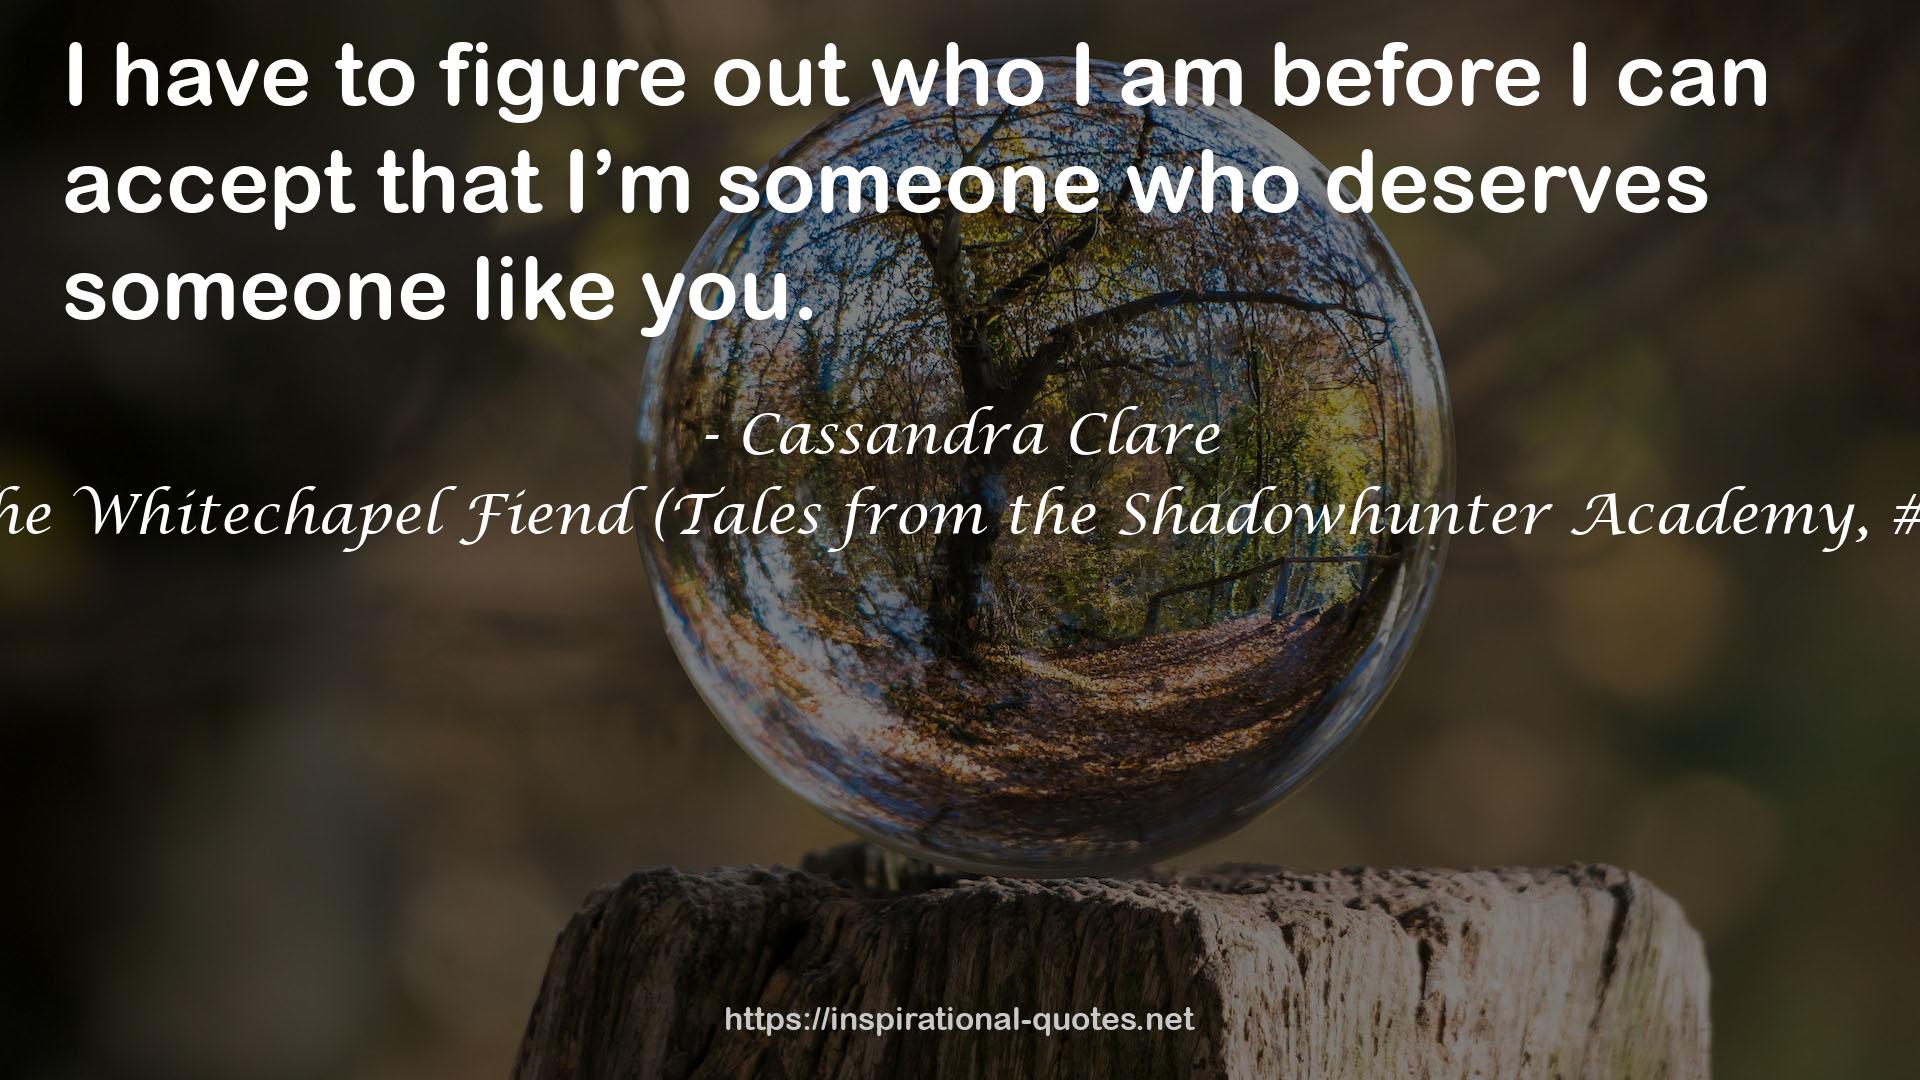 The Whitechapel Fiend (Tales from the Shadowhunter Academy, #3) QUOTES